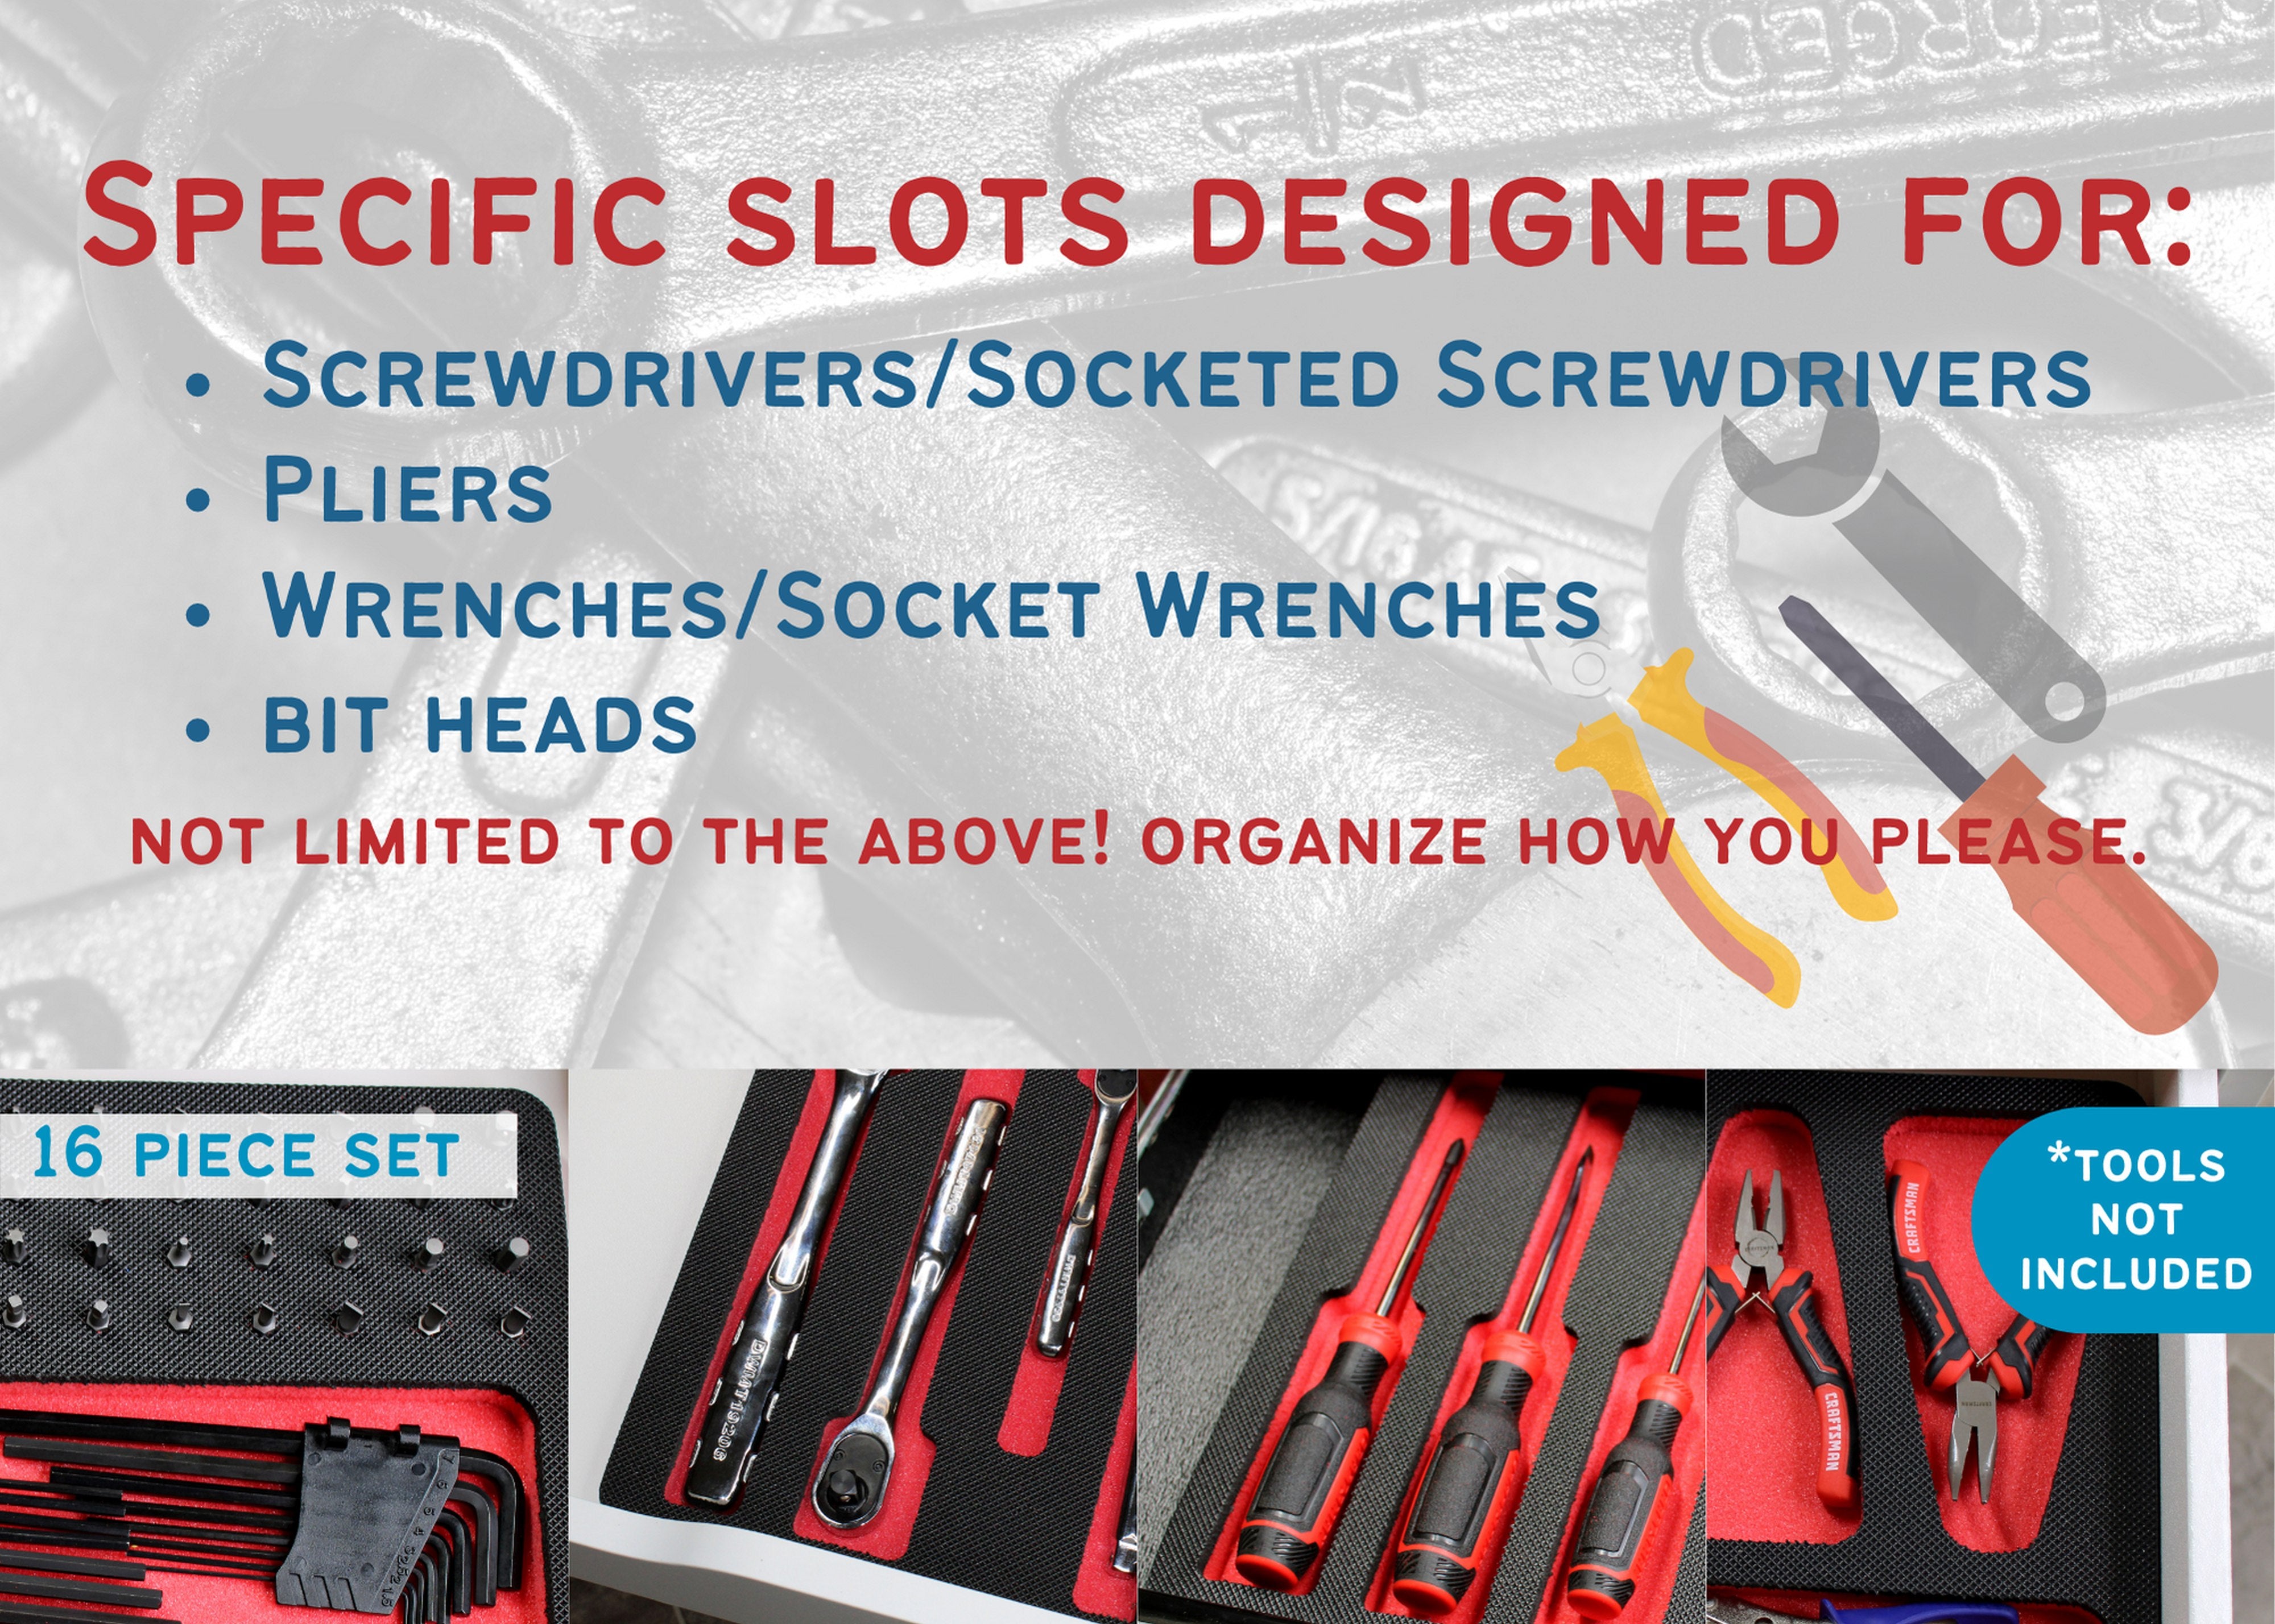 Tool Drawer Organizer 16-Piece Insert Set Red and Black Durable Foam Holds Many Tools and Accessories 10 x 11 Inch Trays Fits Craftsman Husky Kobalt Milwaukee Many Others